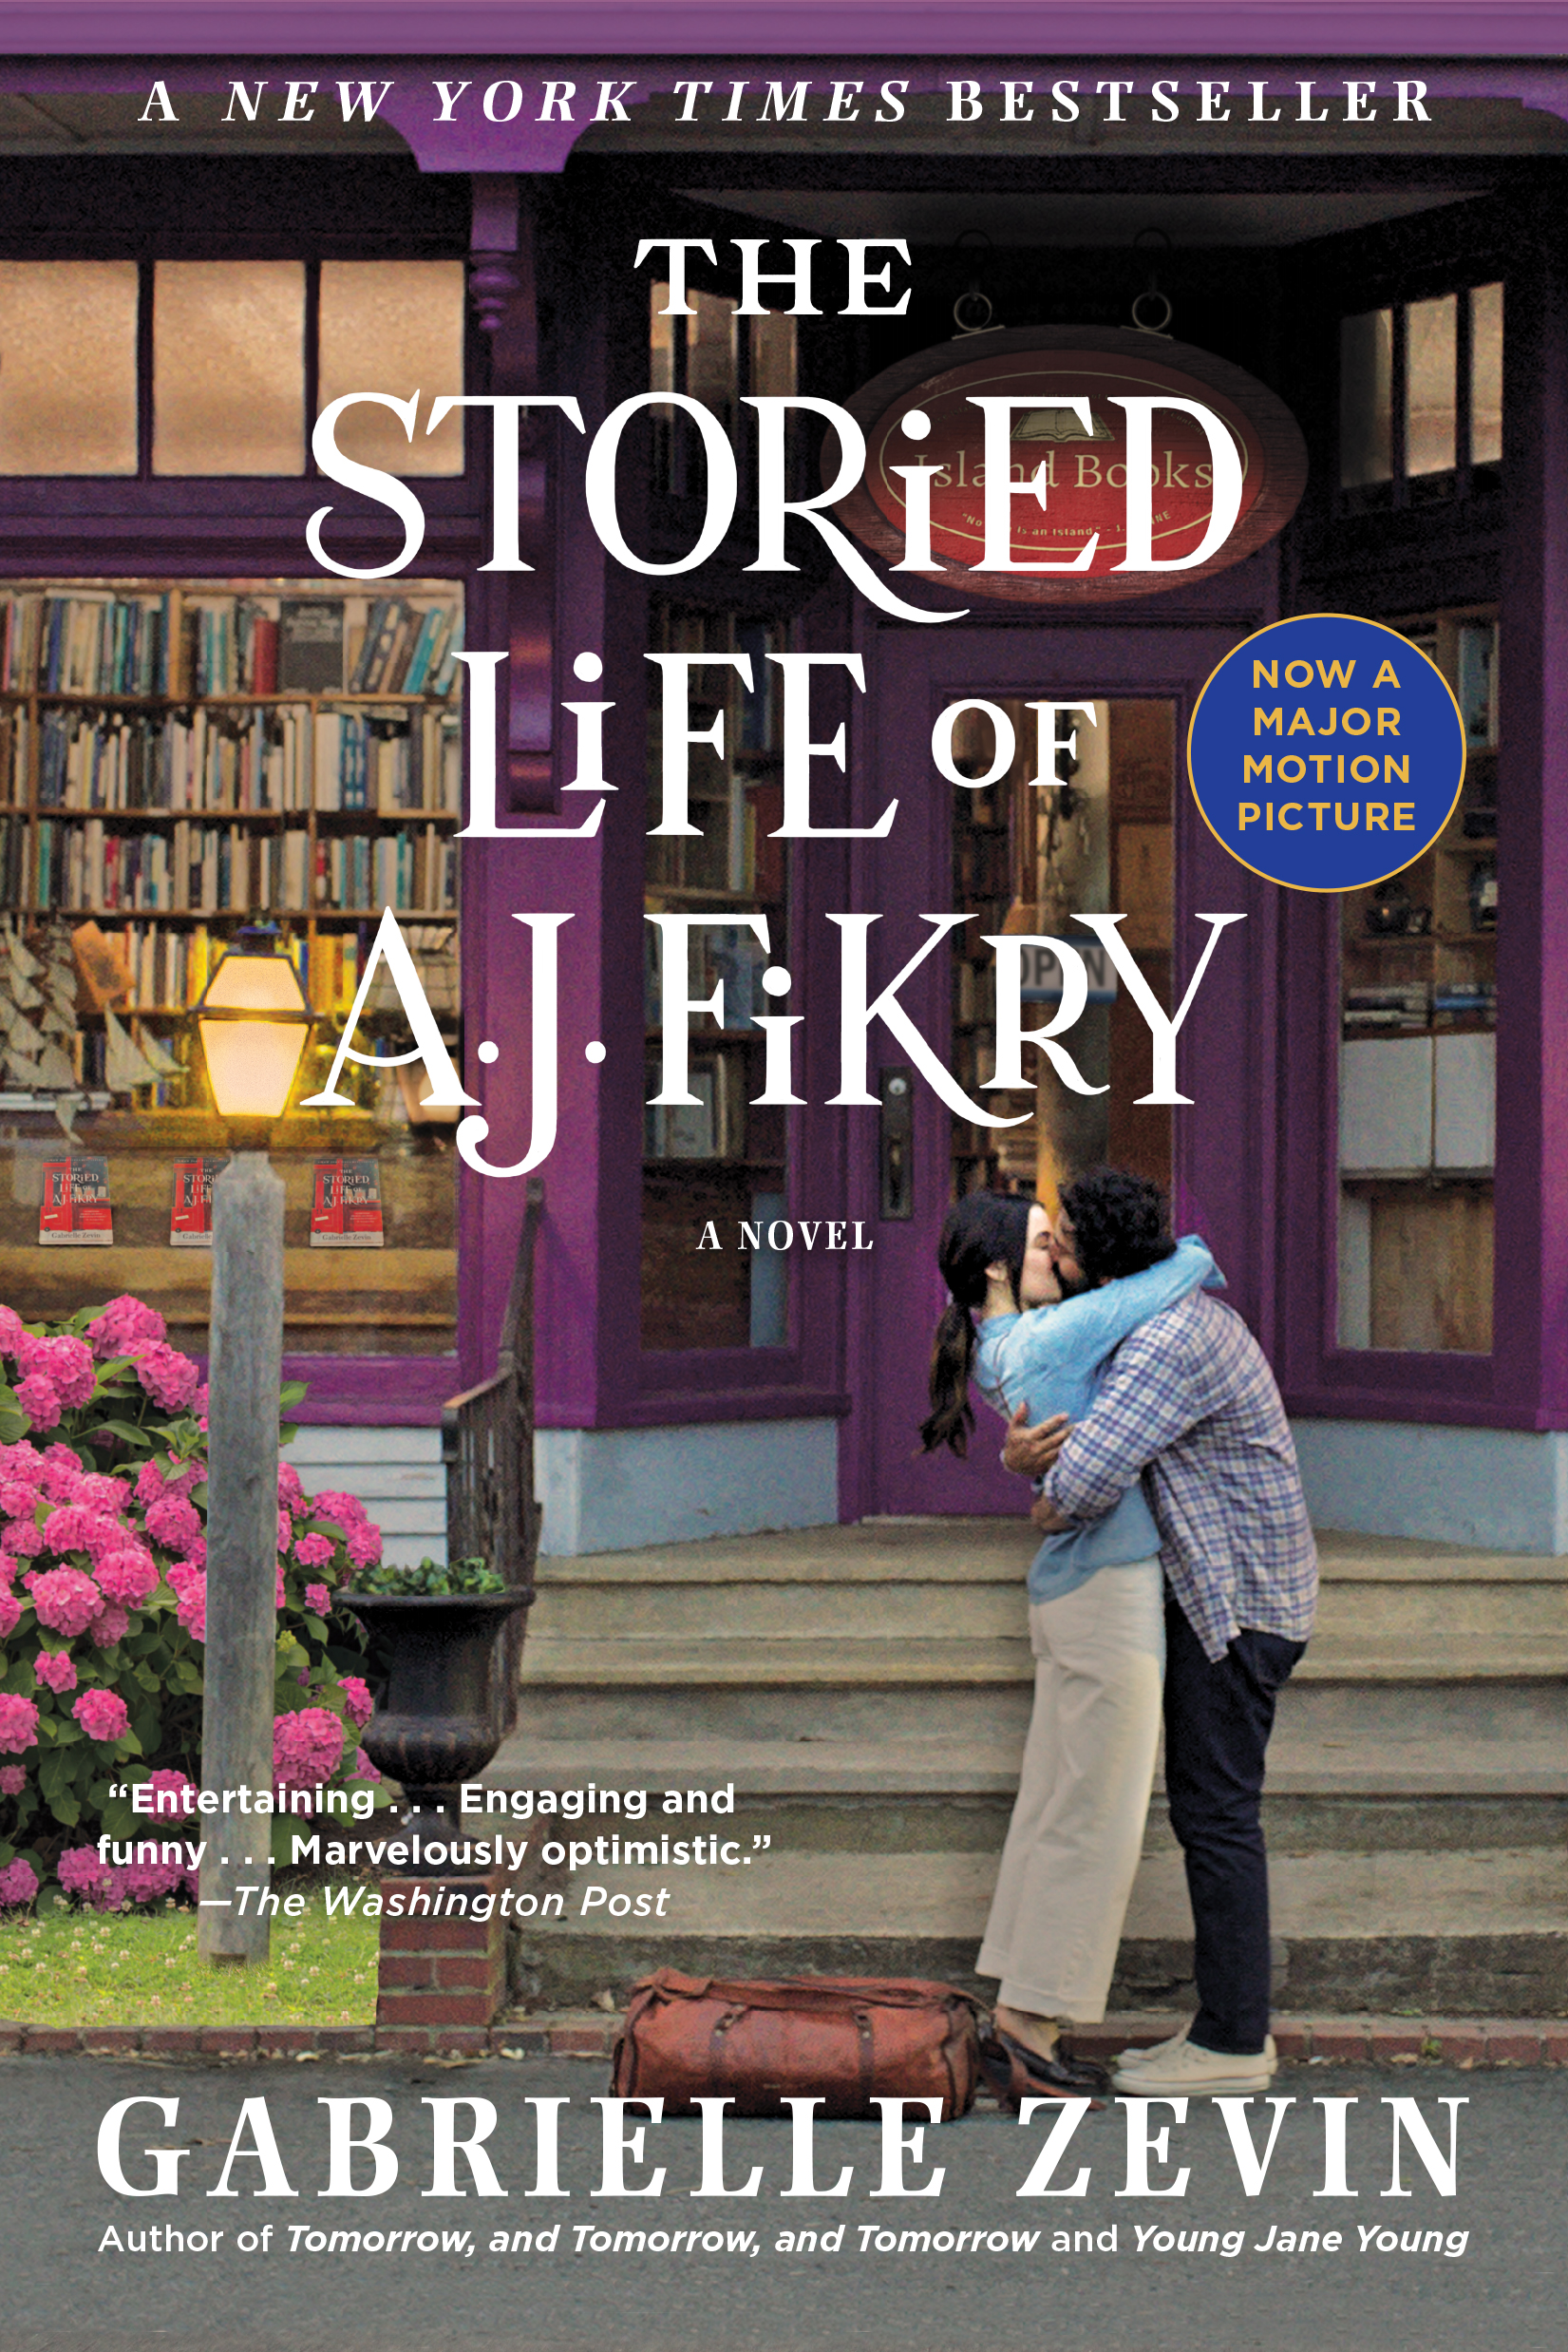 The Storied Life of A. J. Fikry (movie tie-in) by Gabrielle Zevin |  Hachette Book Group